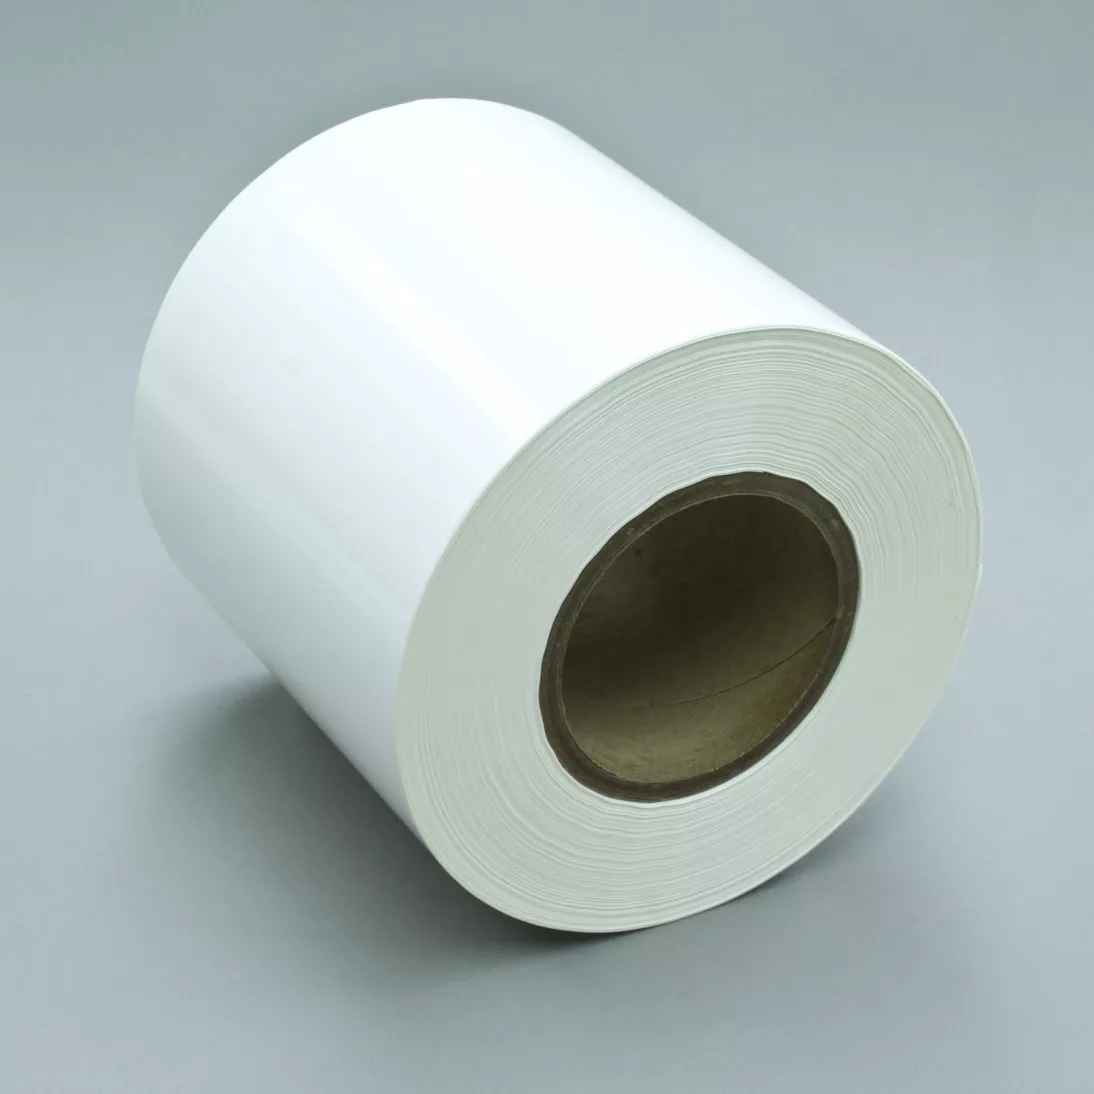 3M™ Thermal Transfer Label Material 3921, Matte White Acrylate, 6 in x
1668 ft, 1 roll per case